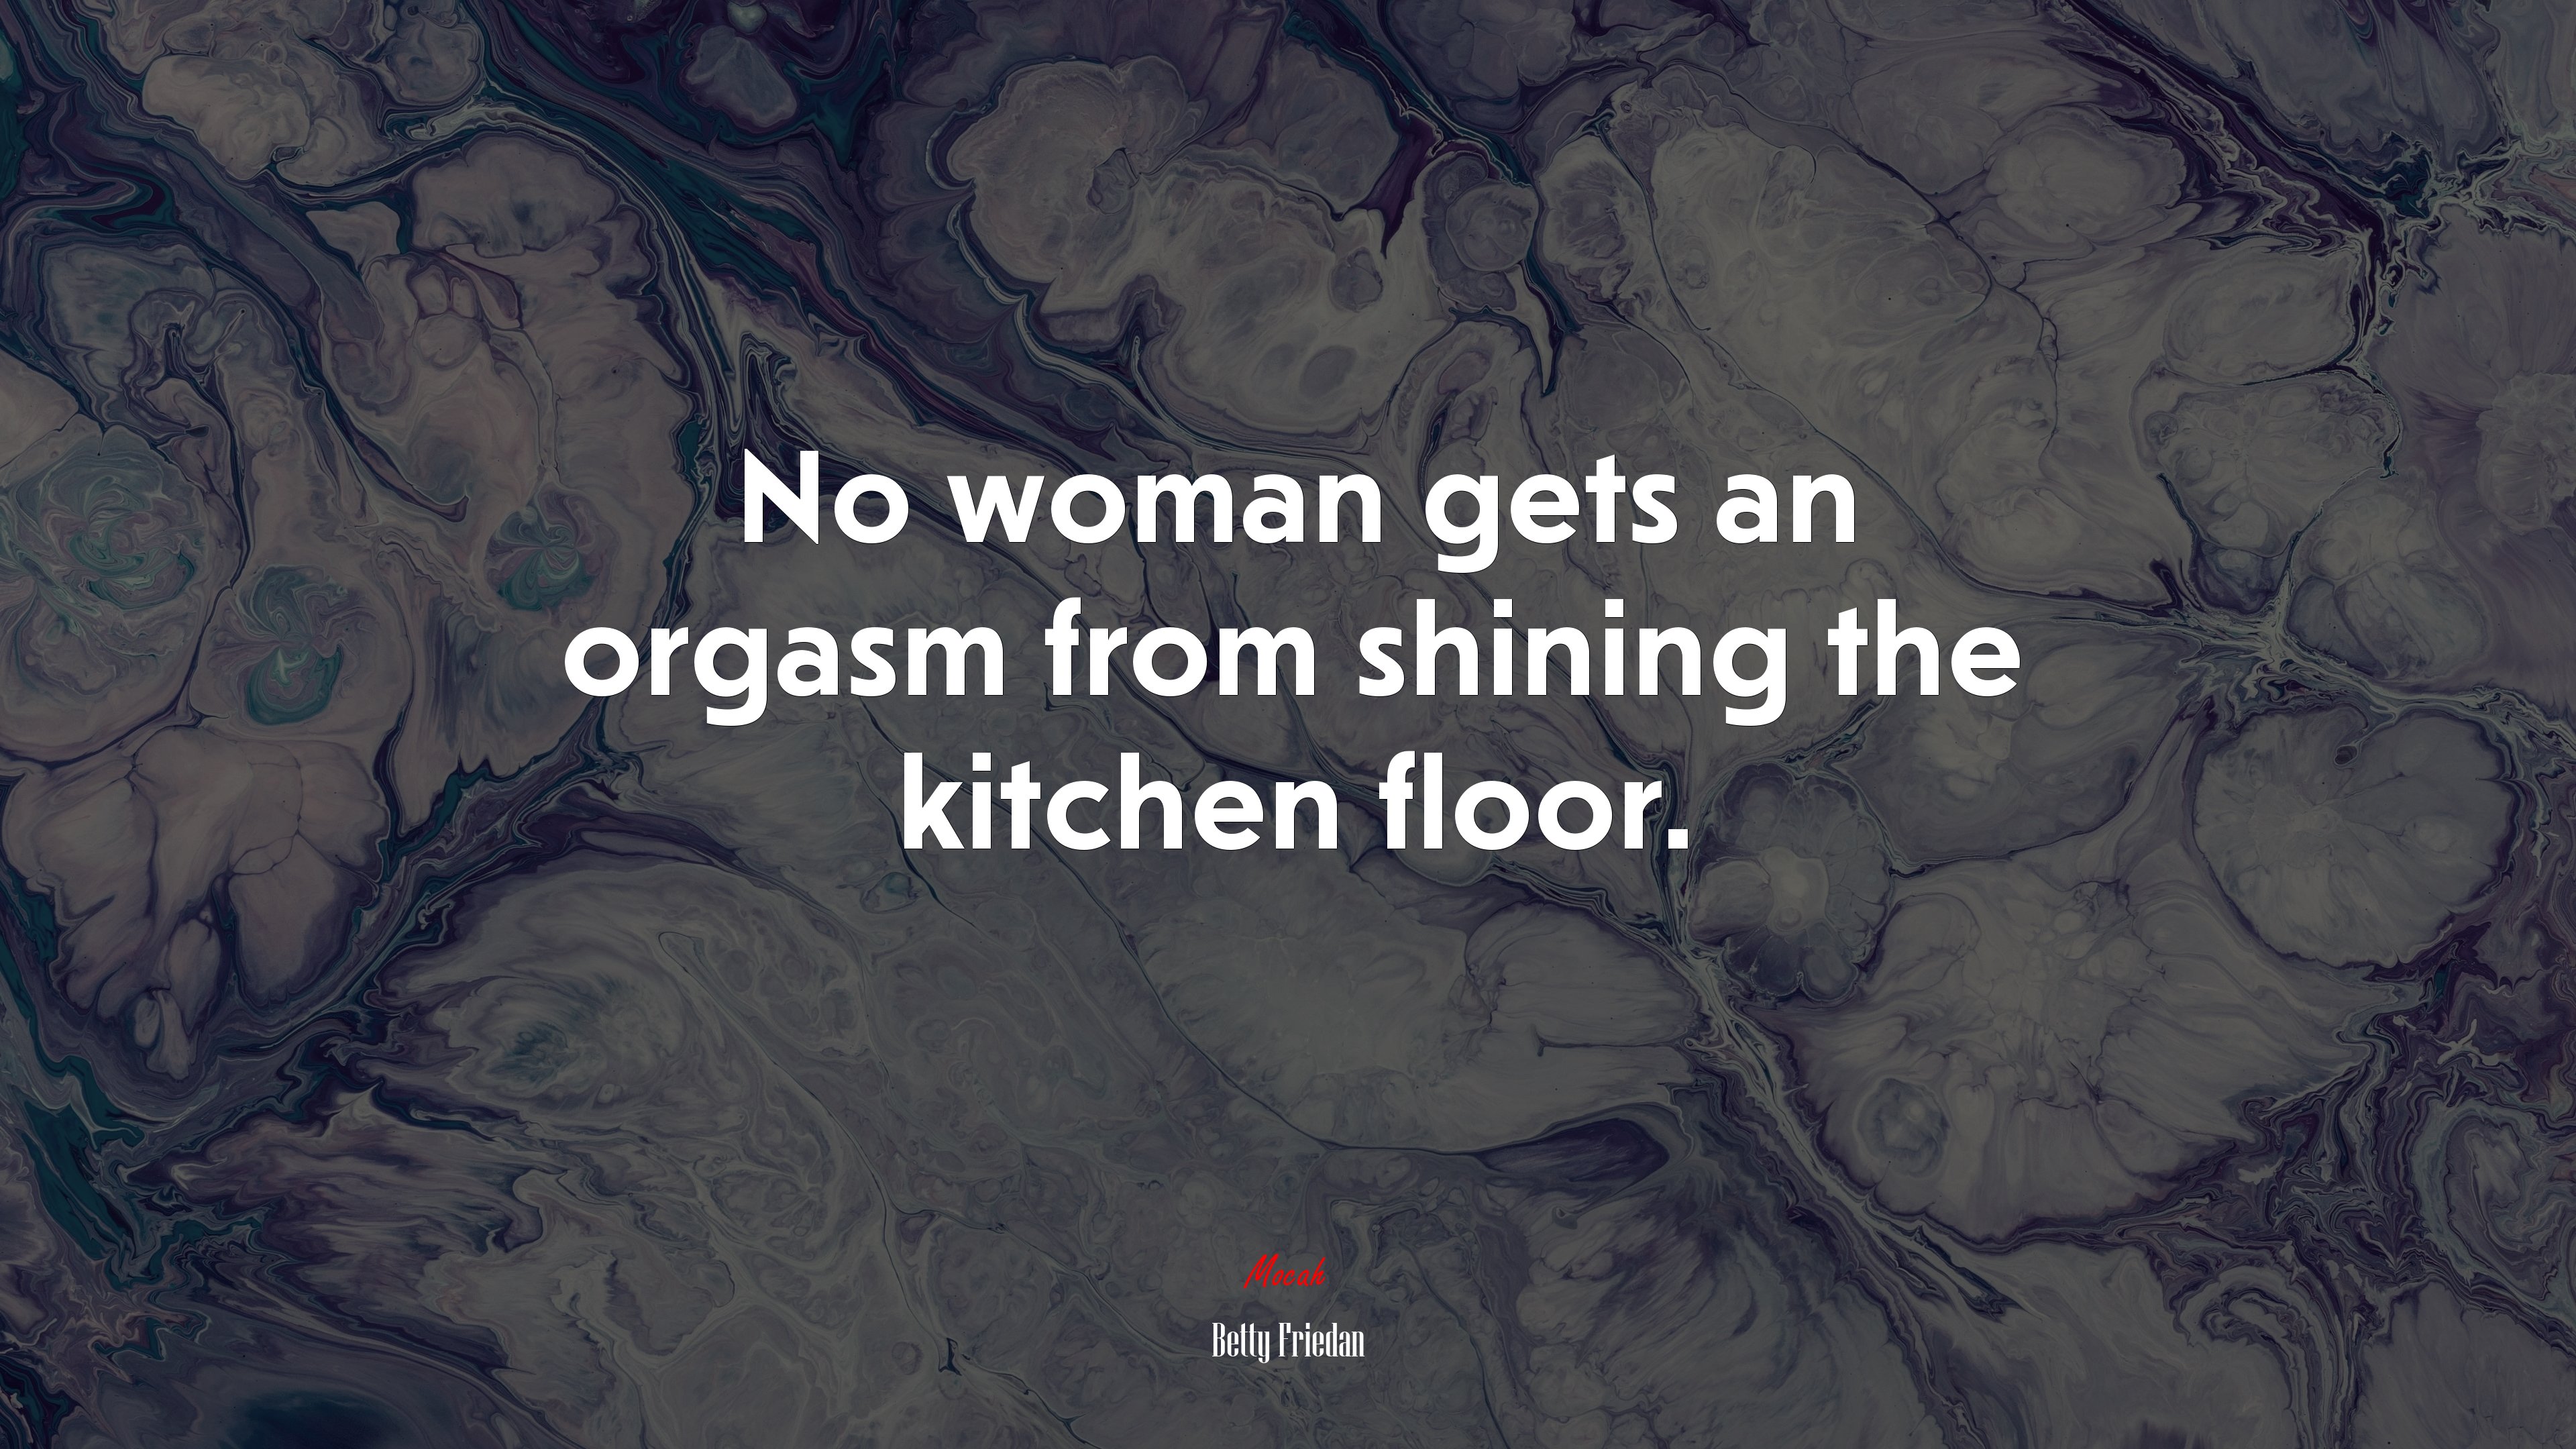 No woman gets an orgasm from shining the kitchen floor betty friedan quote